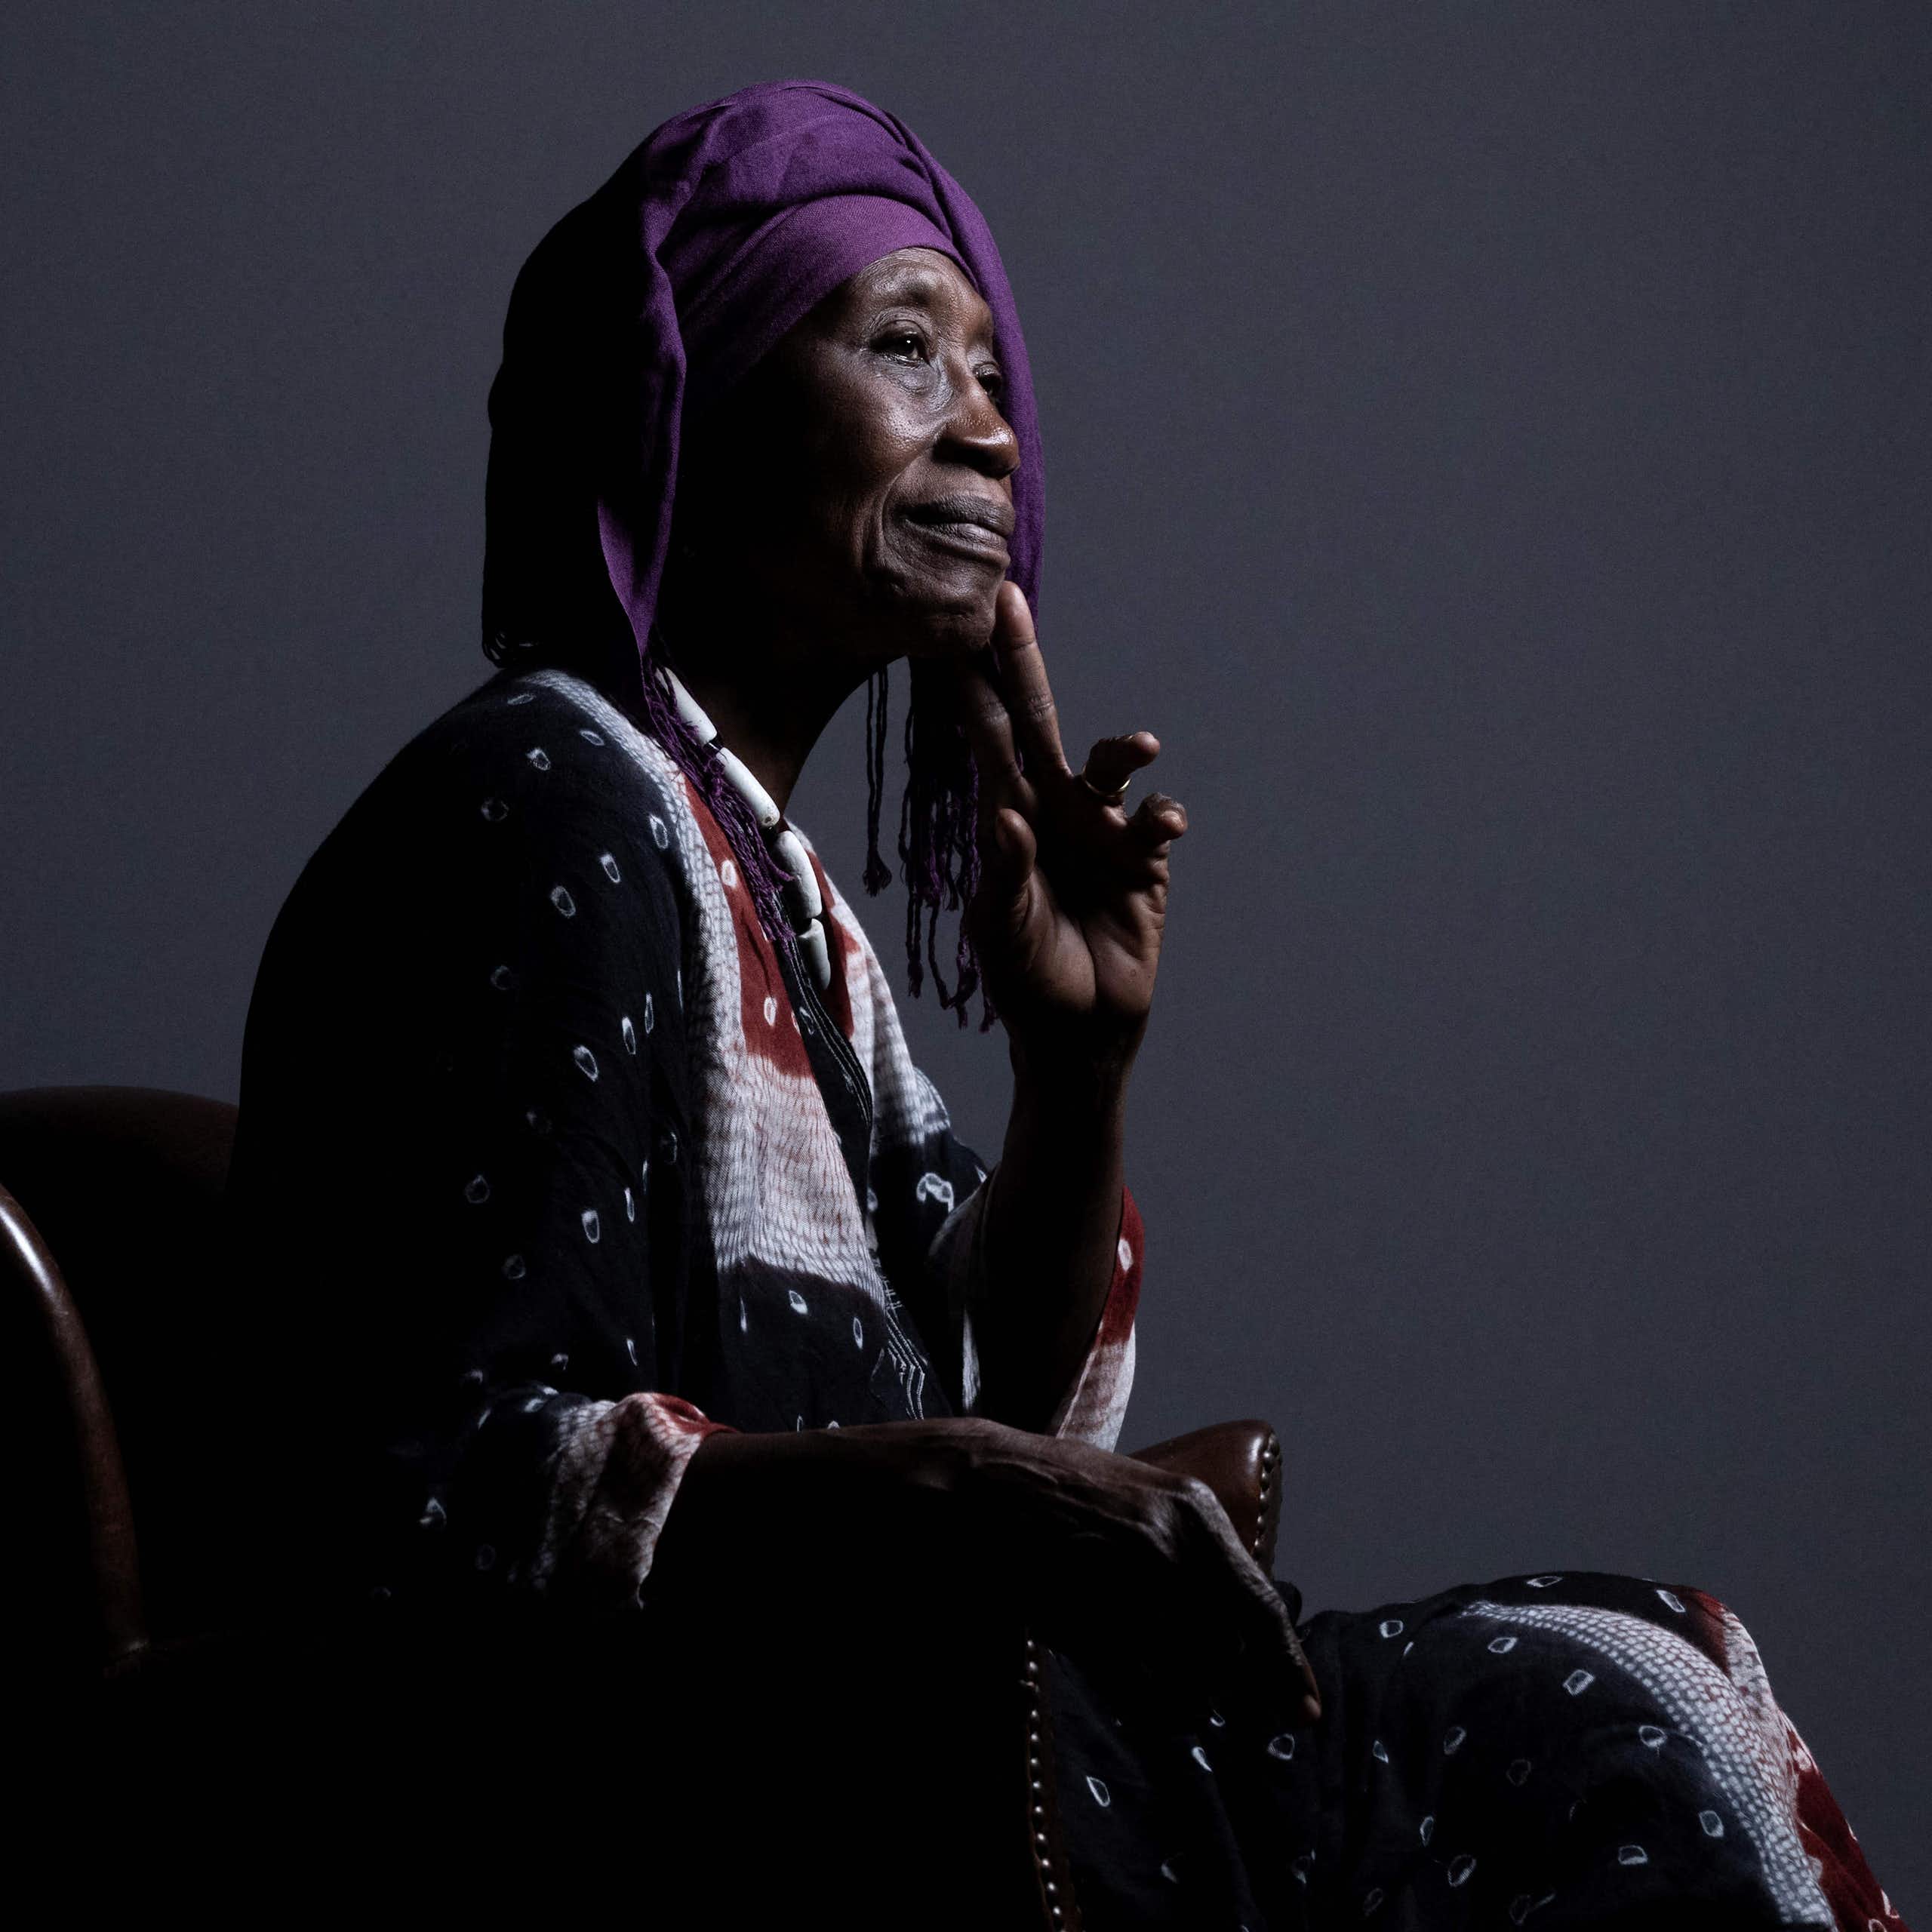 An elderly African woman sits in a chair posing for a portrait in profile, dressed in traditional African attire with a hand to her chin and smiling slightly.